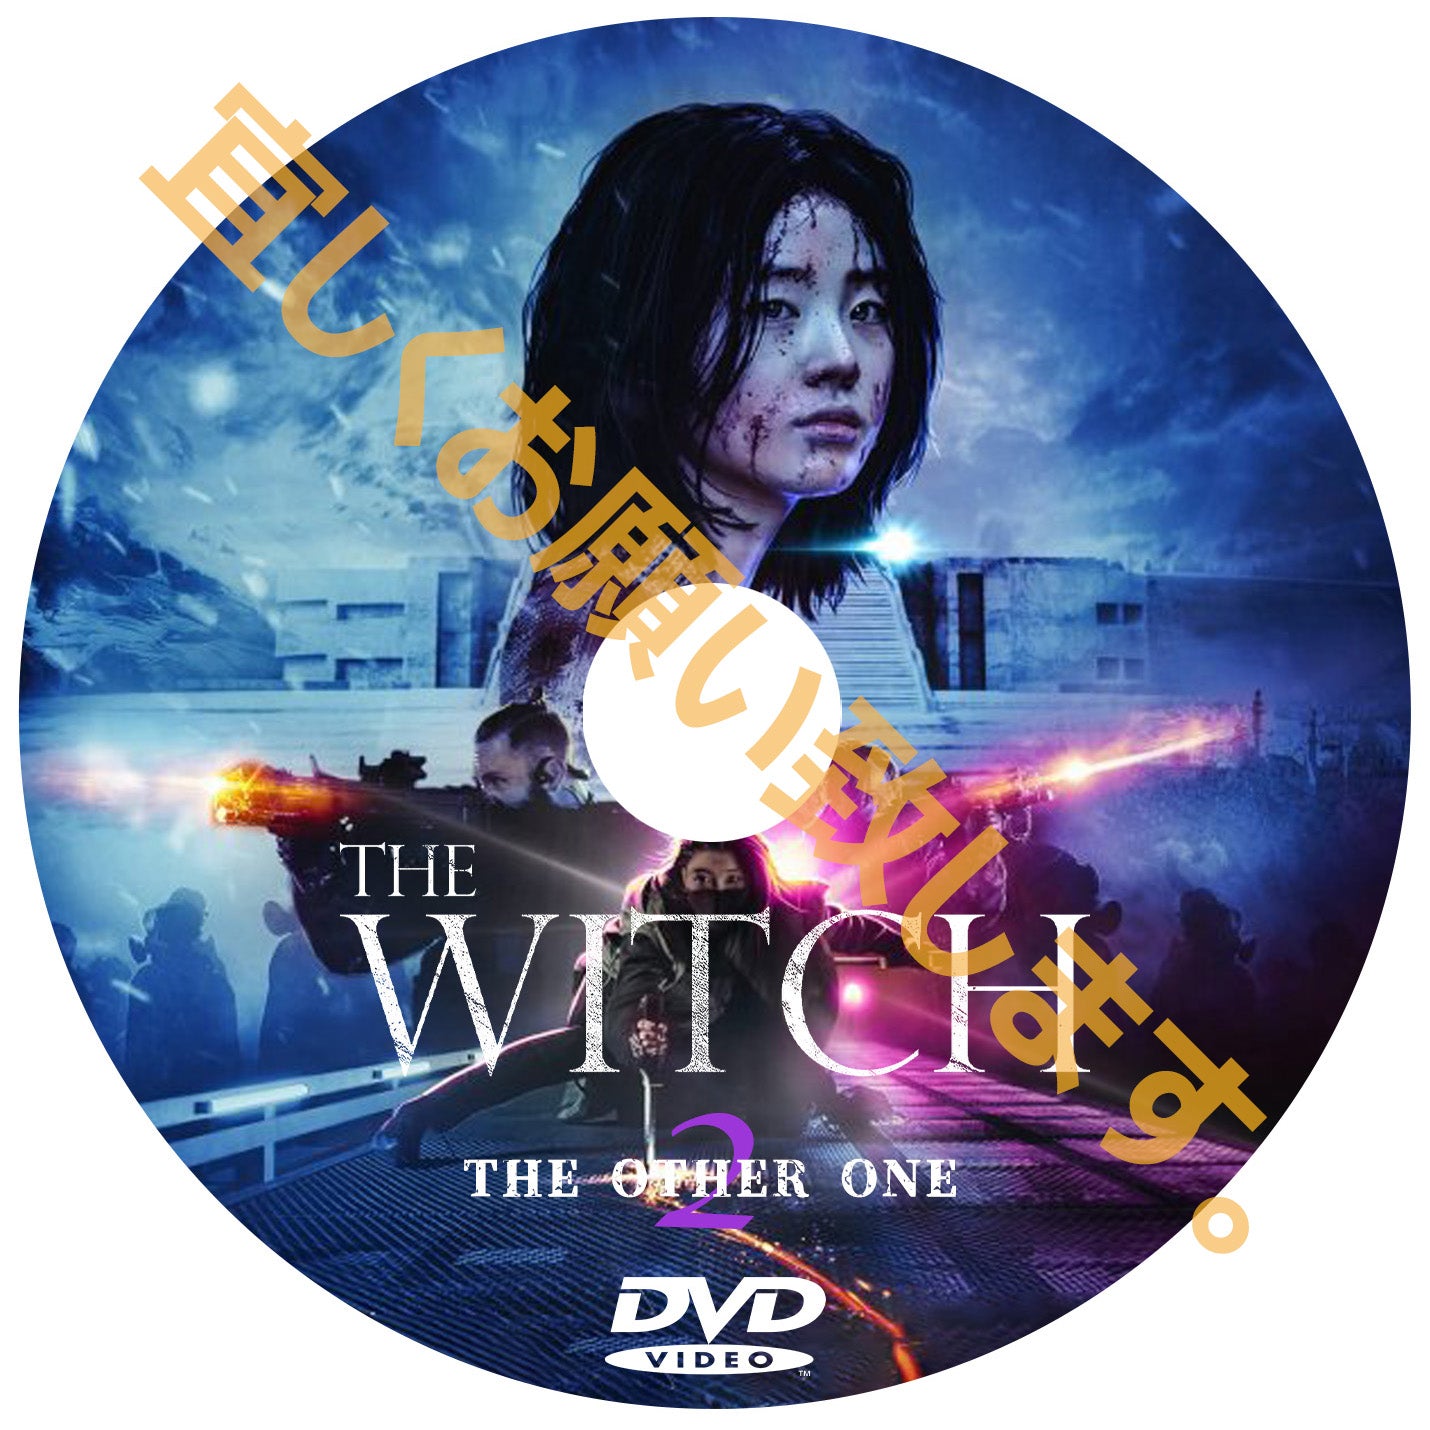 591. THE WITCH魔女~増殖~【パート２】（韓国映画）